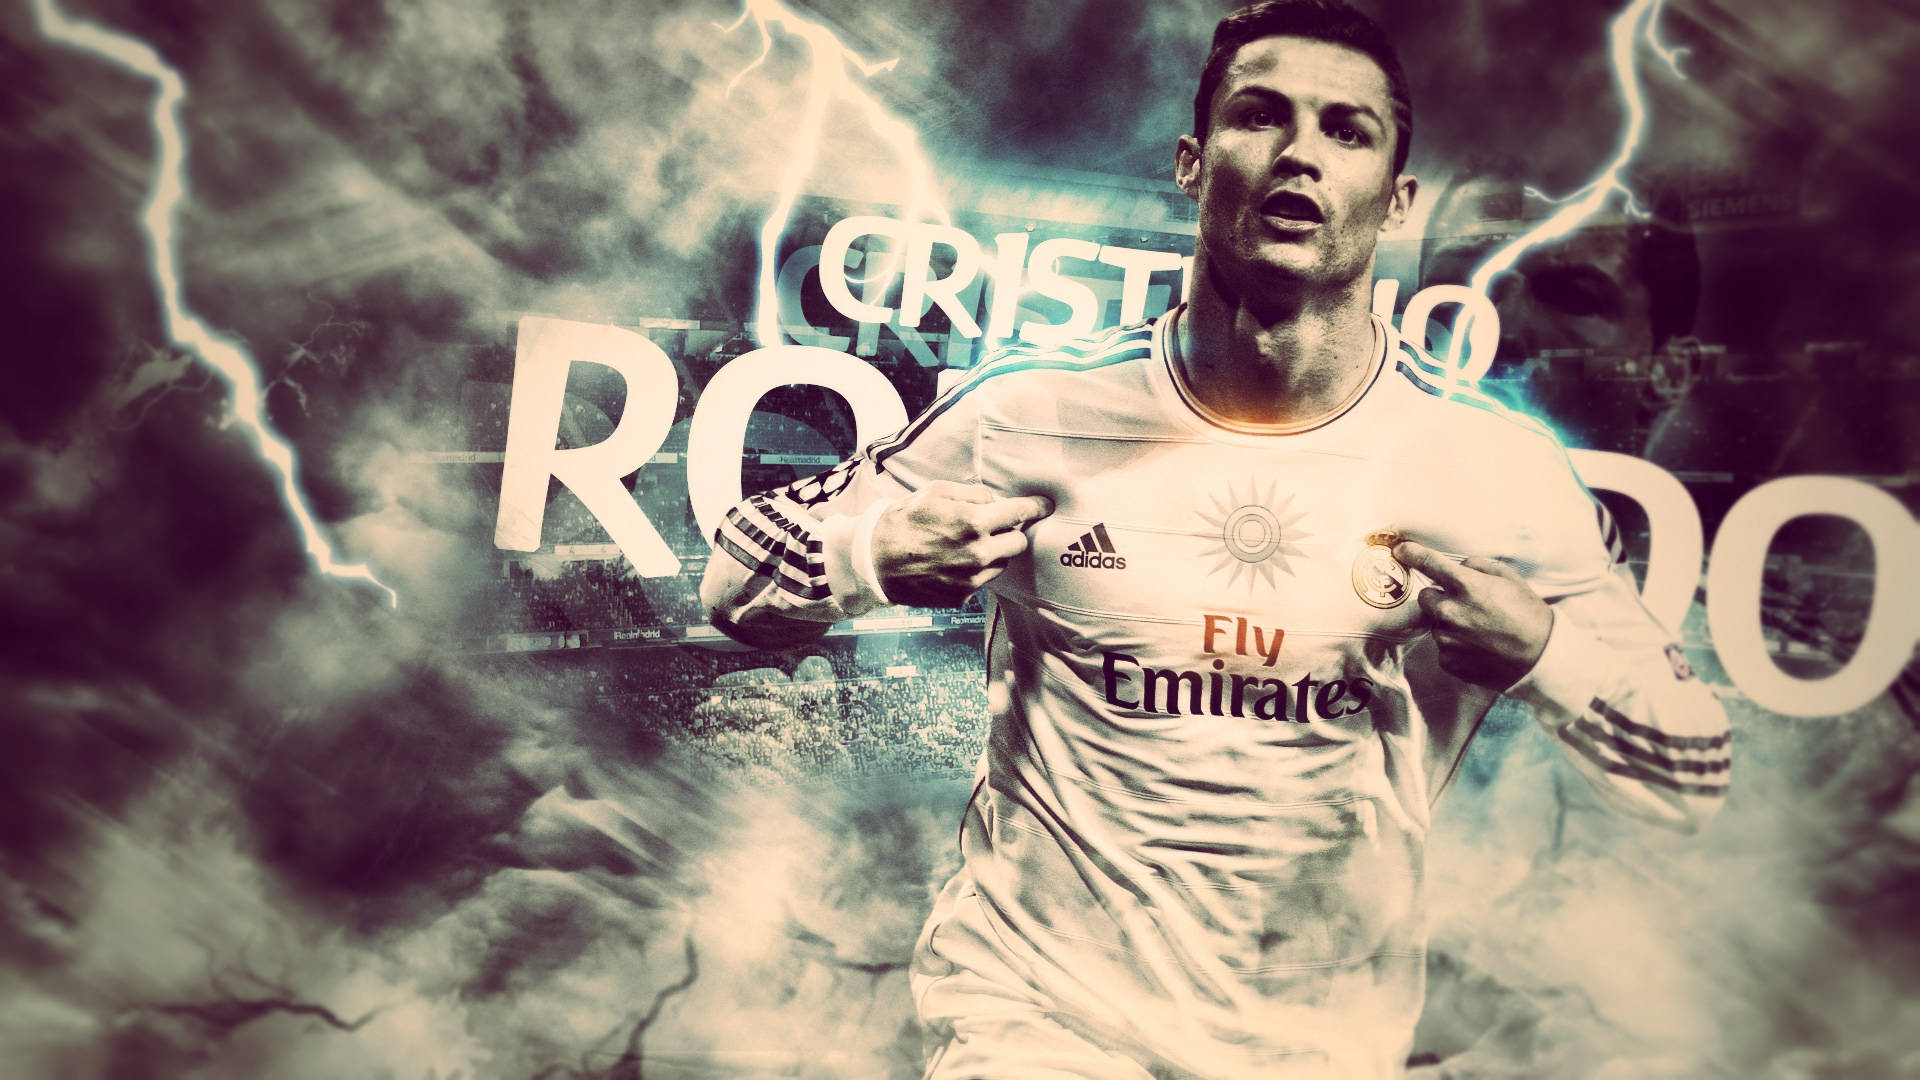 Cristiano ronaldo cr 7 Wallpapers Download  MobCup